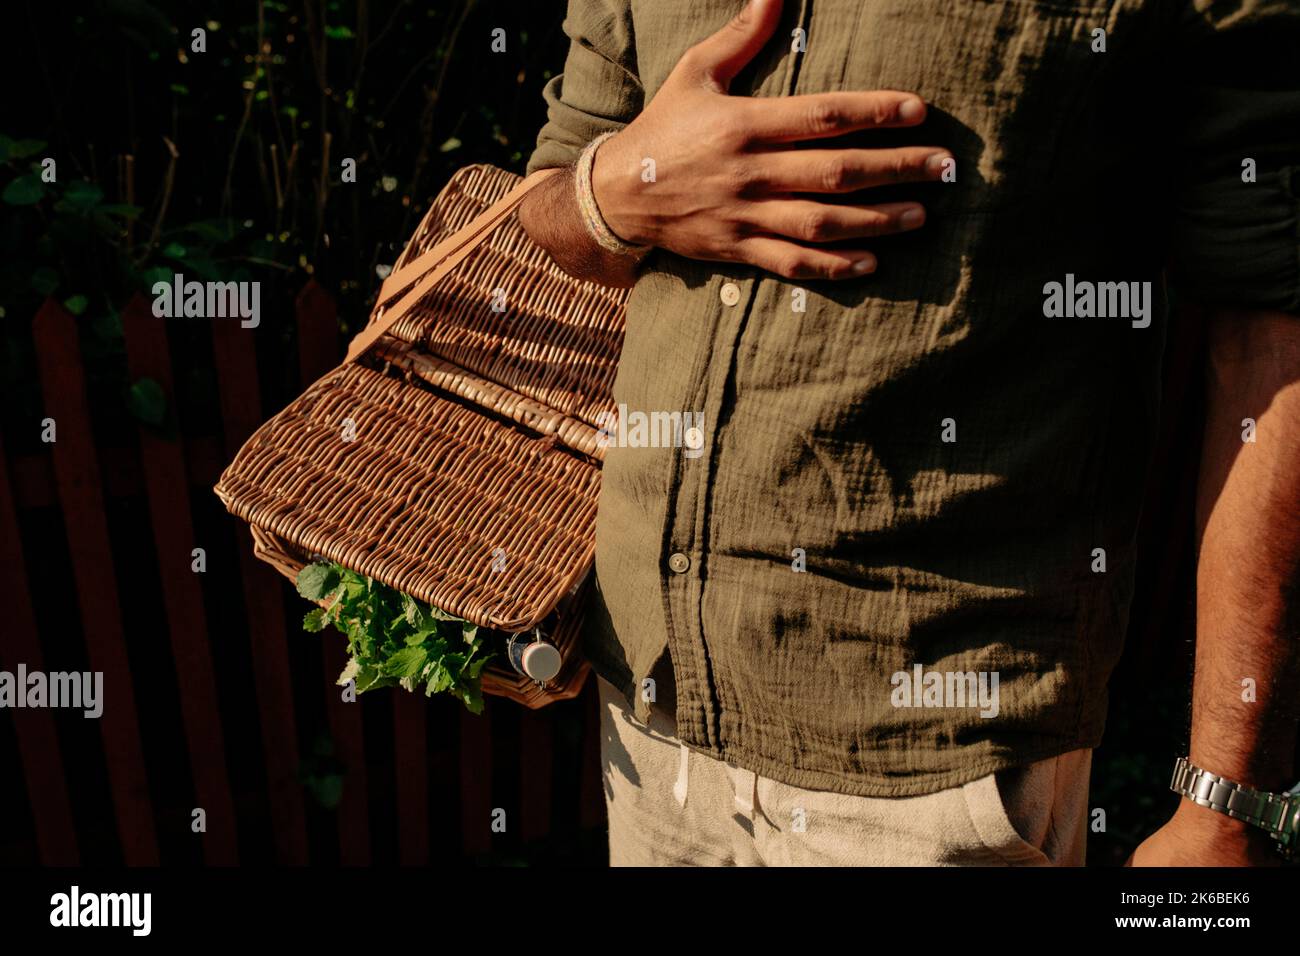 Midsection of man with hand on chest carrying picnic basket Stock Photo